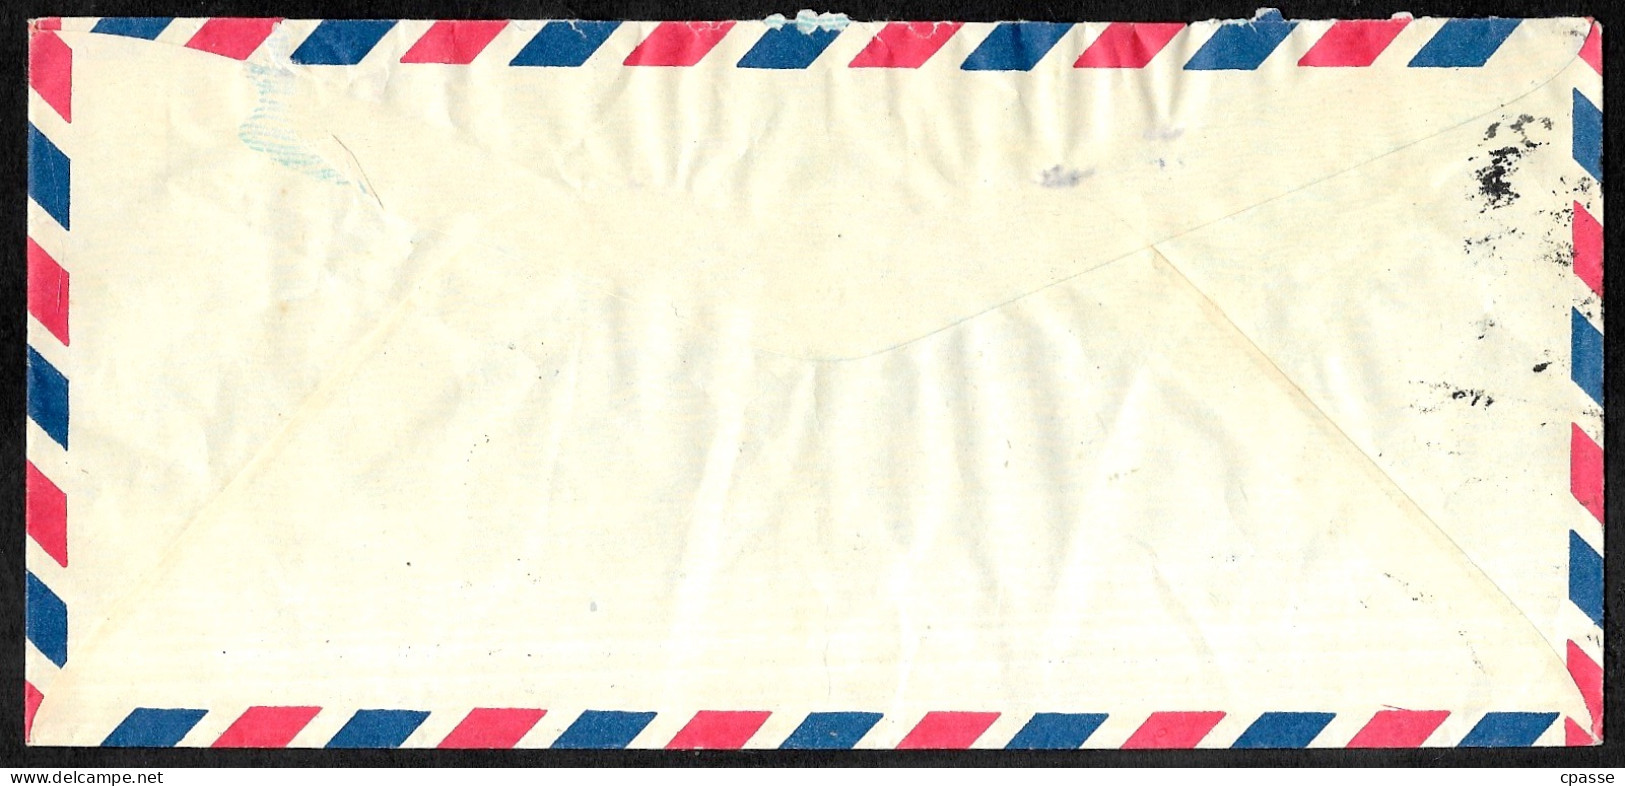 1979 Lettre (5 Stamps) Republic Of CHINA TAIWAN (Formose) Taipei To France POSTE AERIENNE By Air Mail - Poste Aérienne